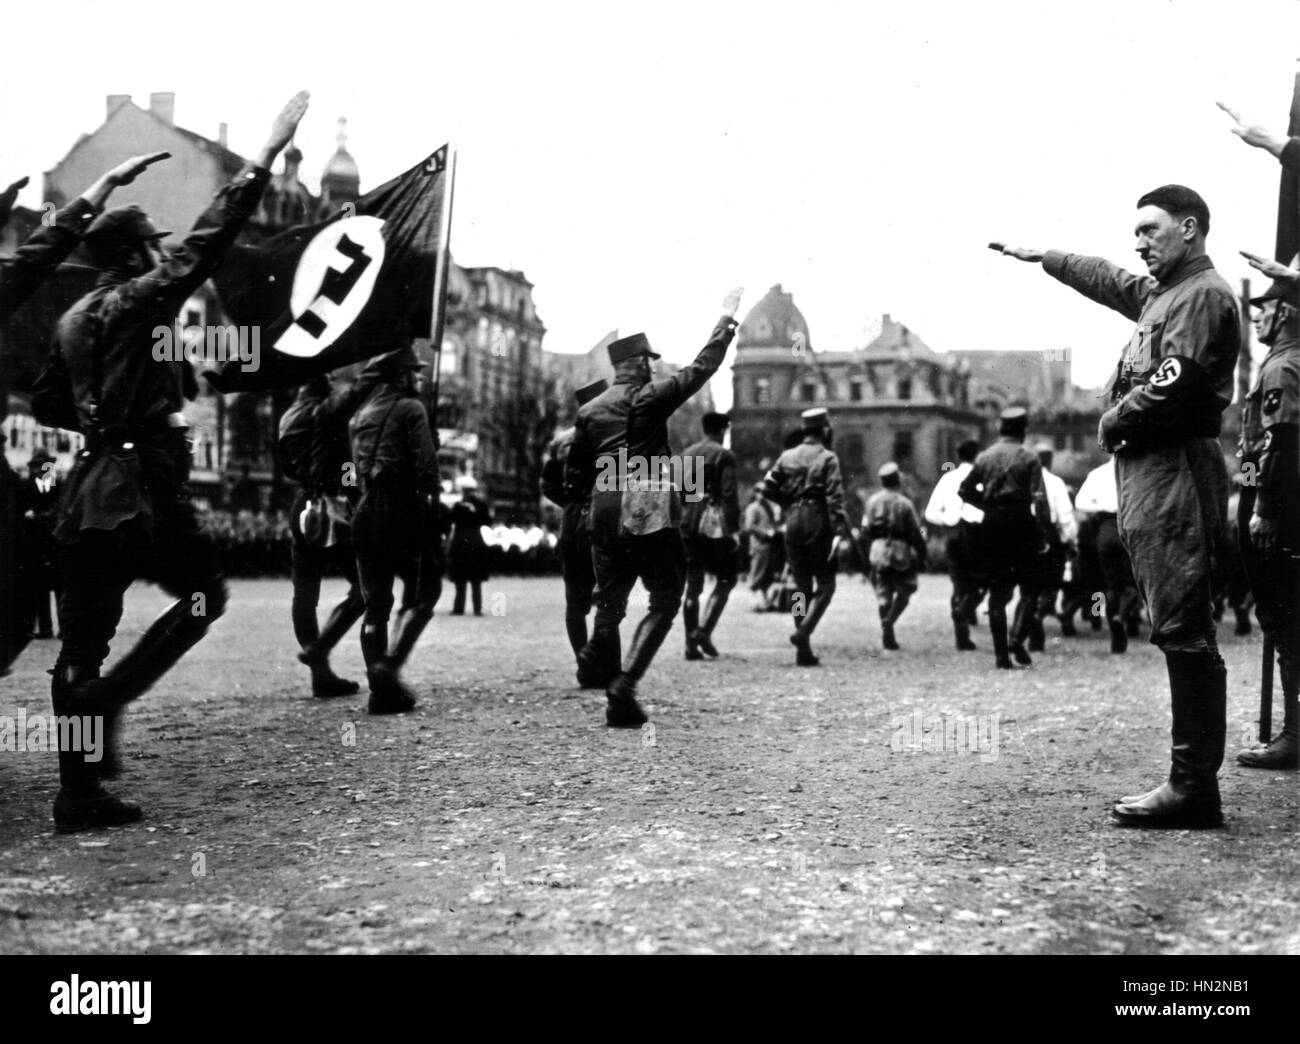 Hitler and S.A. army 20th century Germany Stock Photo